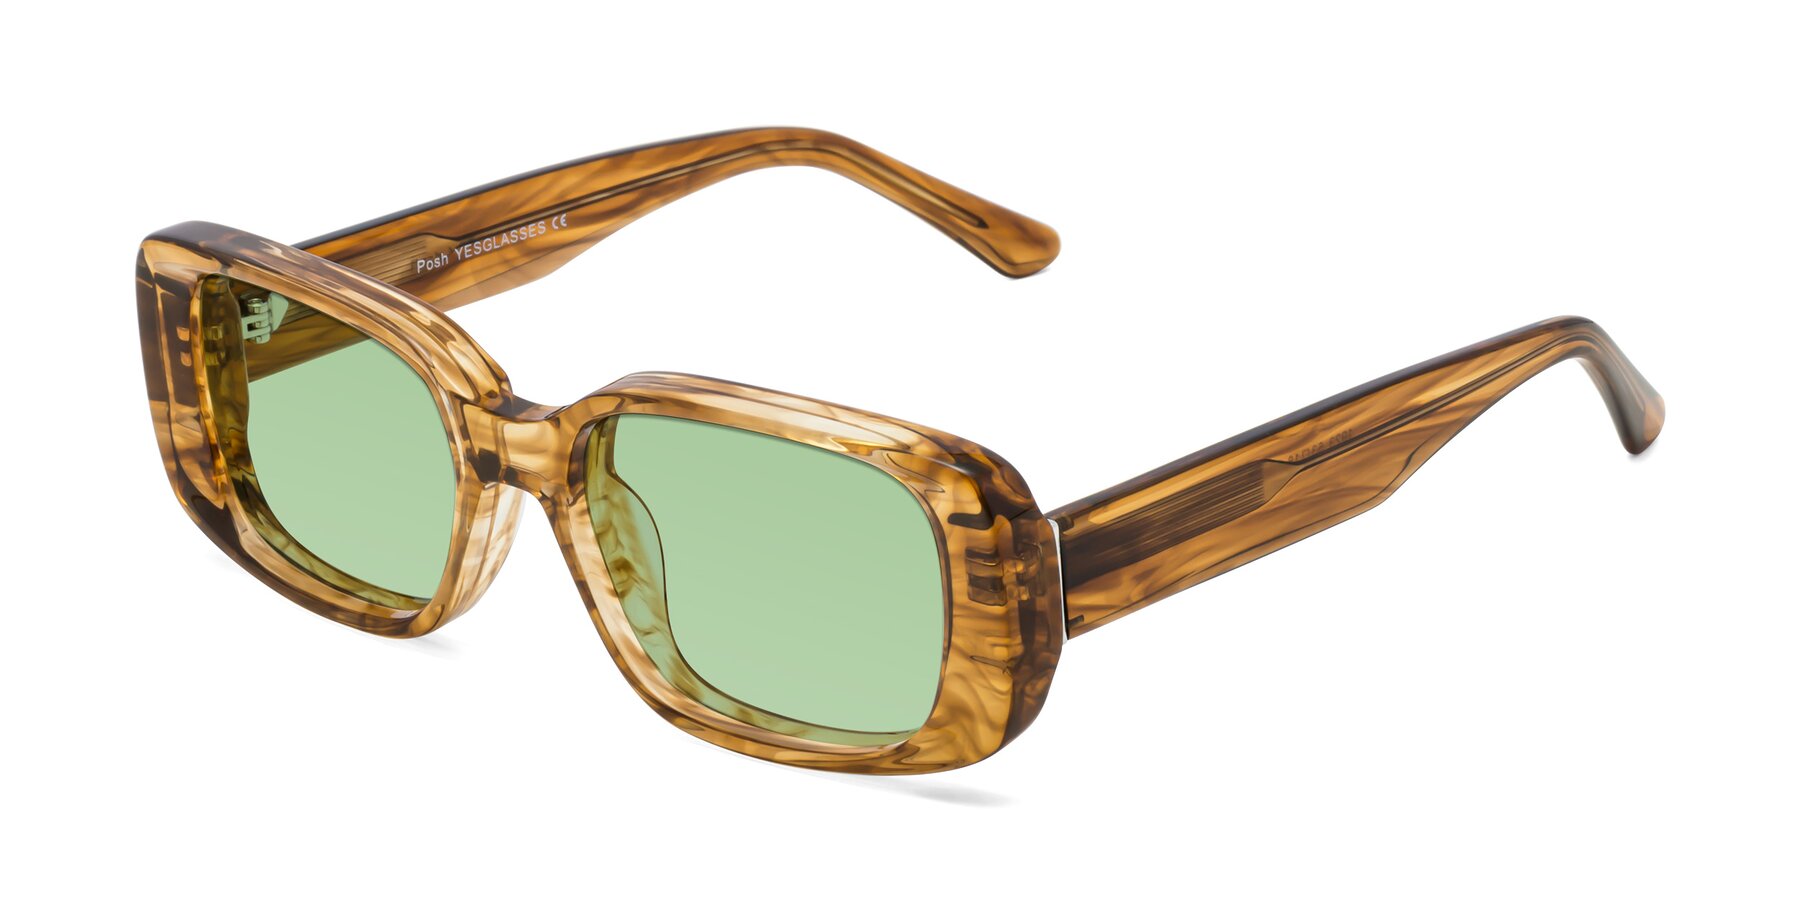 Angle of Posh in Stripe Amber with Medium Green Tinted Lenses